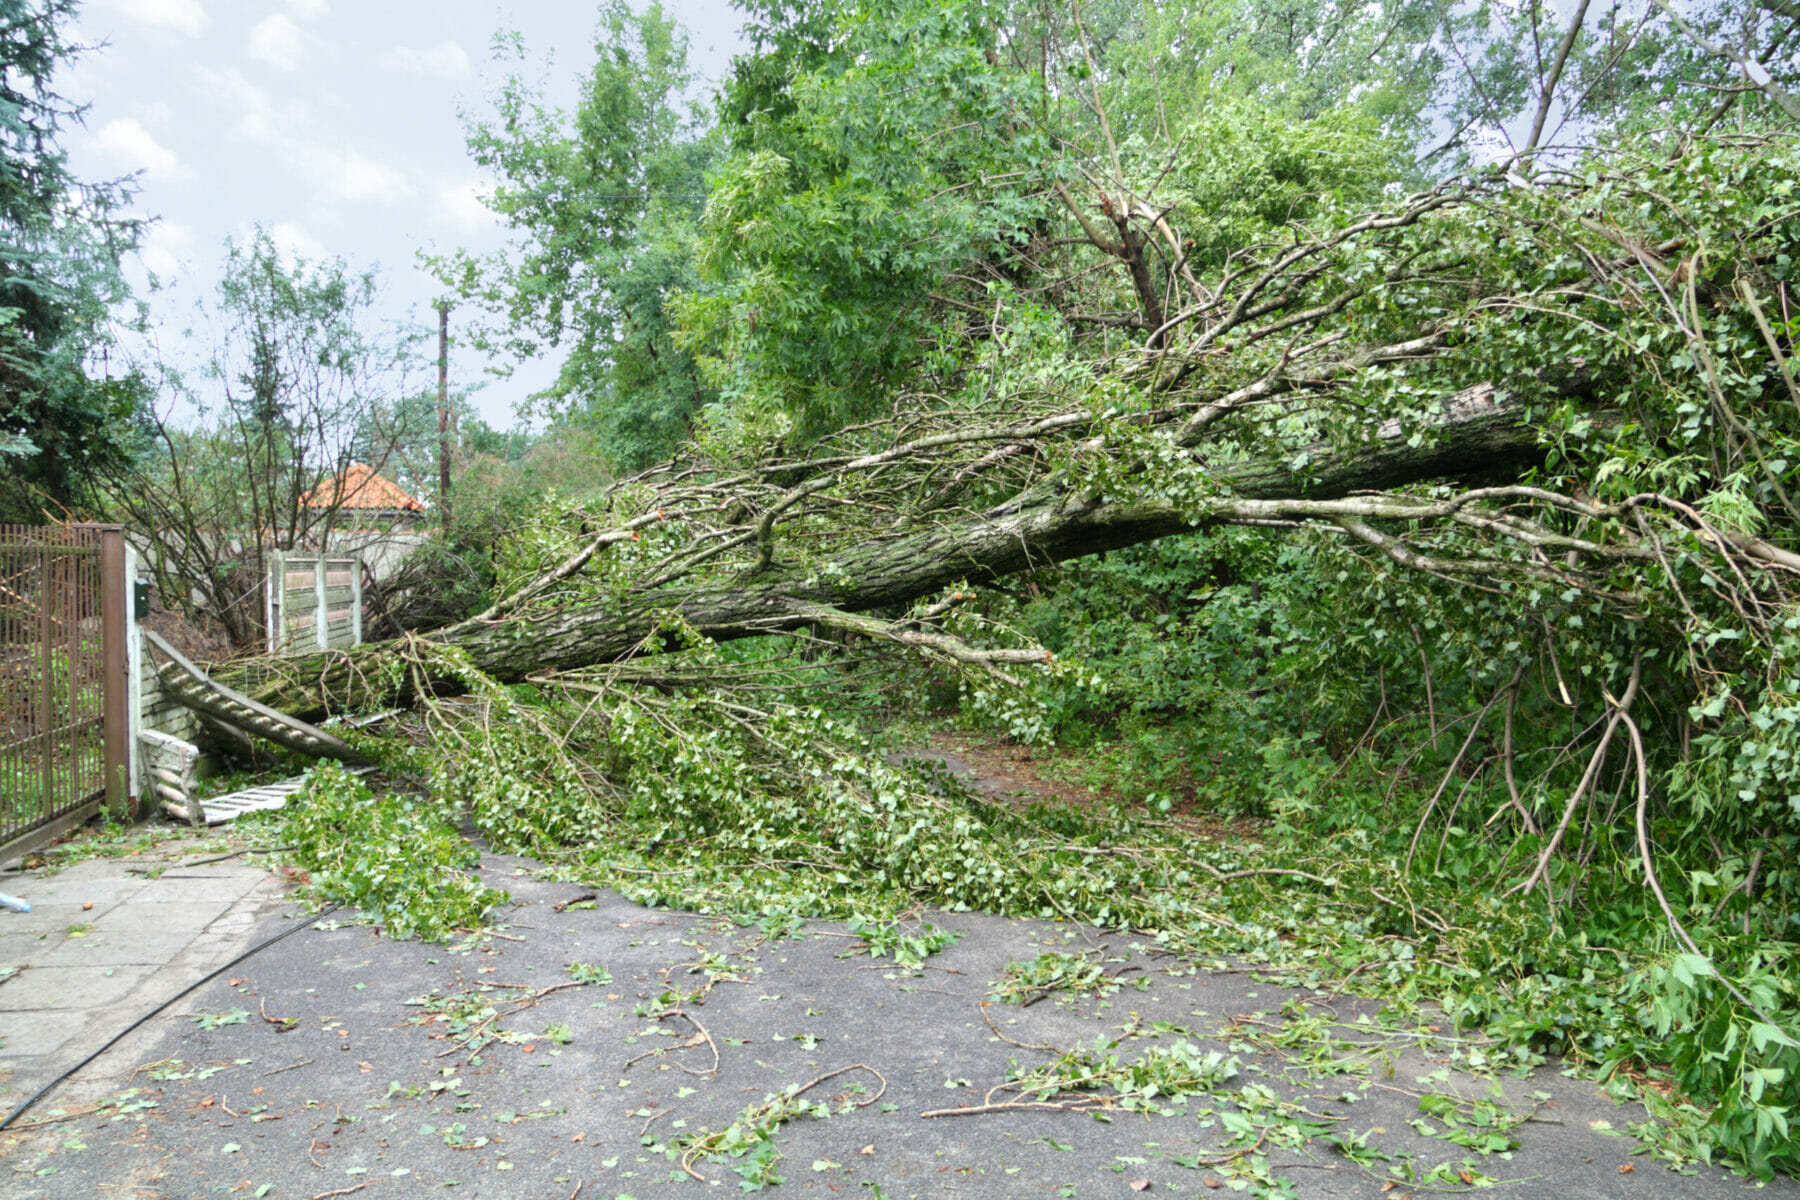 Damaged fallen tree on a rural road after a strong storm